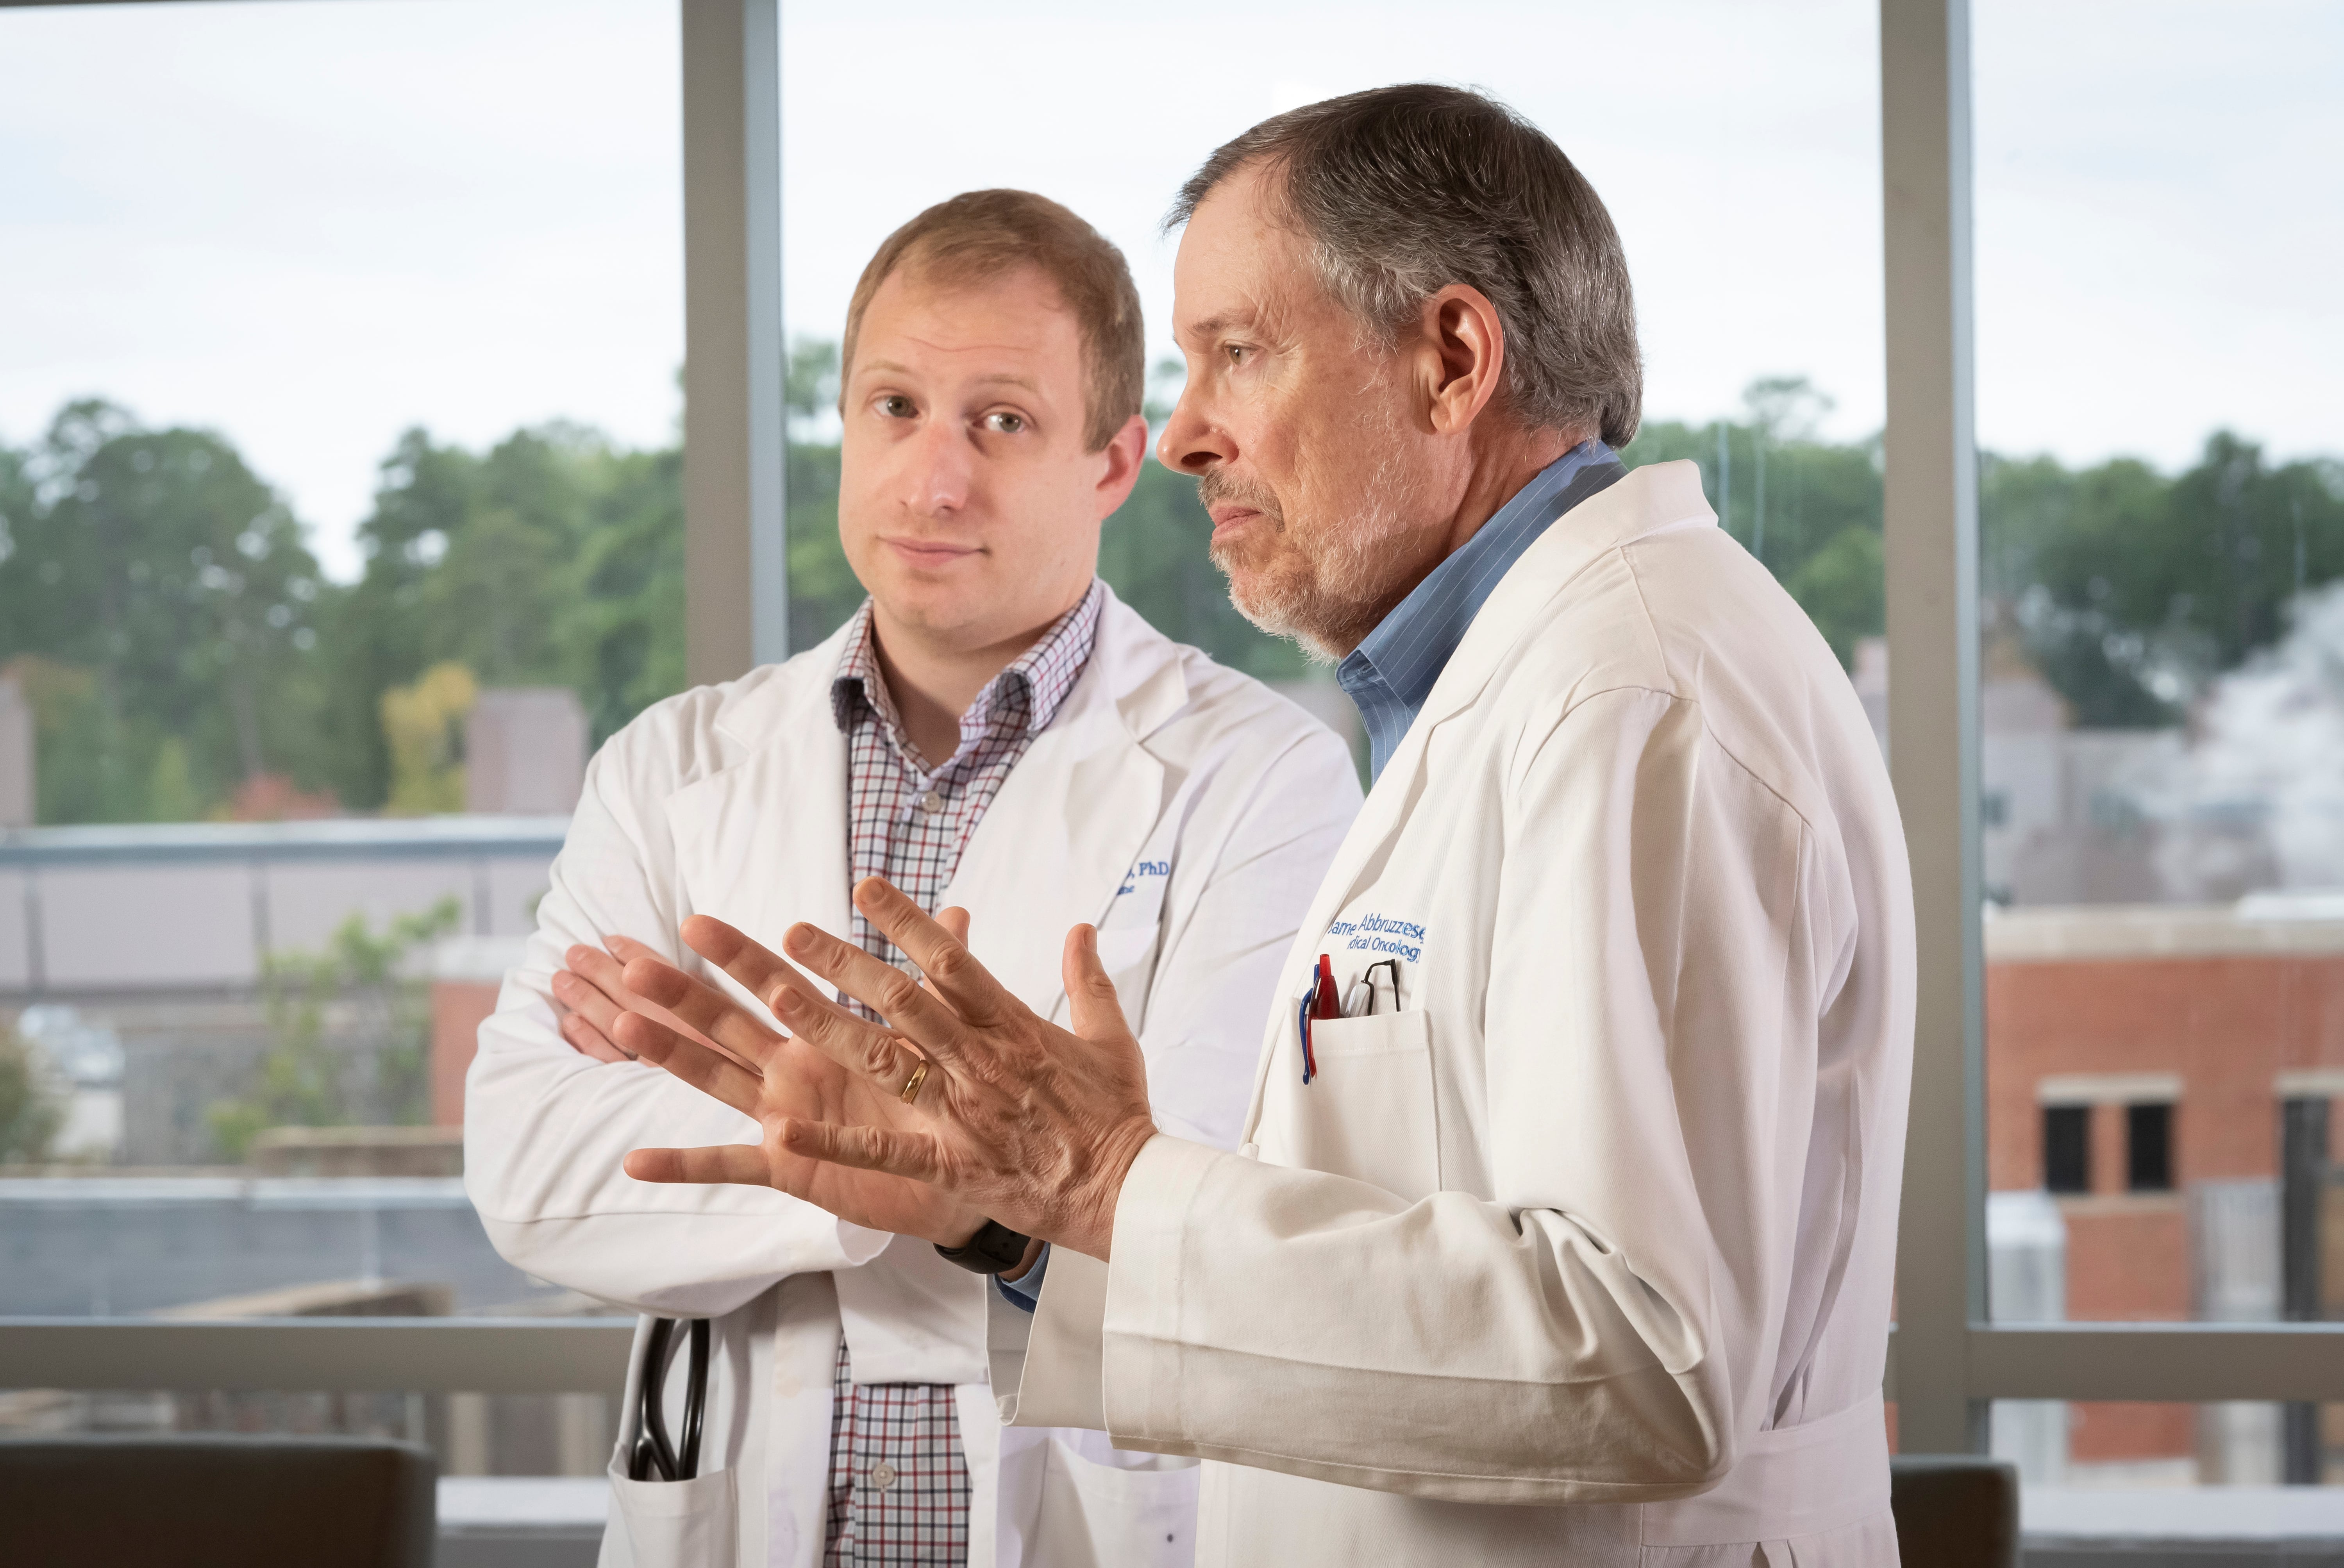 Hematology/oncology fellow Ryne Ramaker (left), and clinician Jim Abbruzzese aim to translate a potential early diagnostic test for pancreatic cancer from the lab to the clinic. Photo by Les Todd.